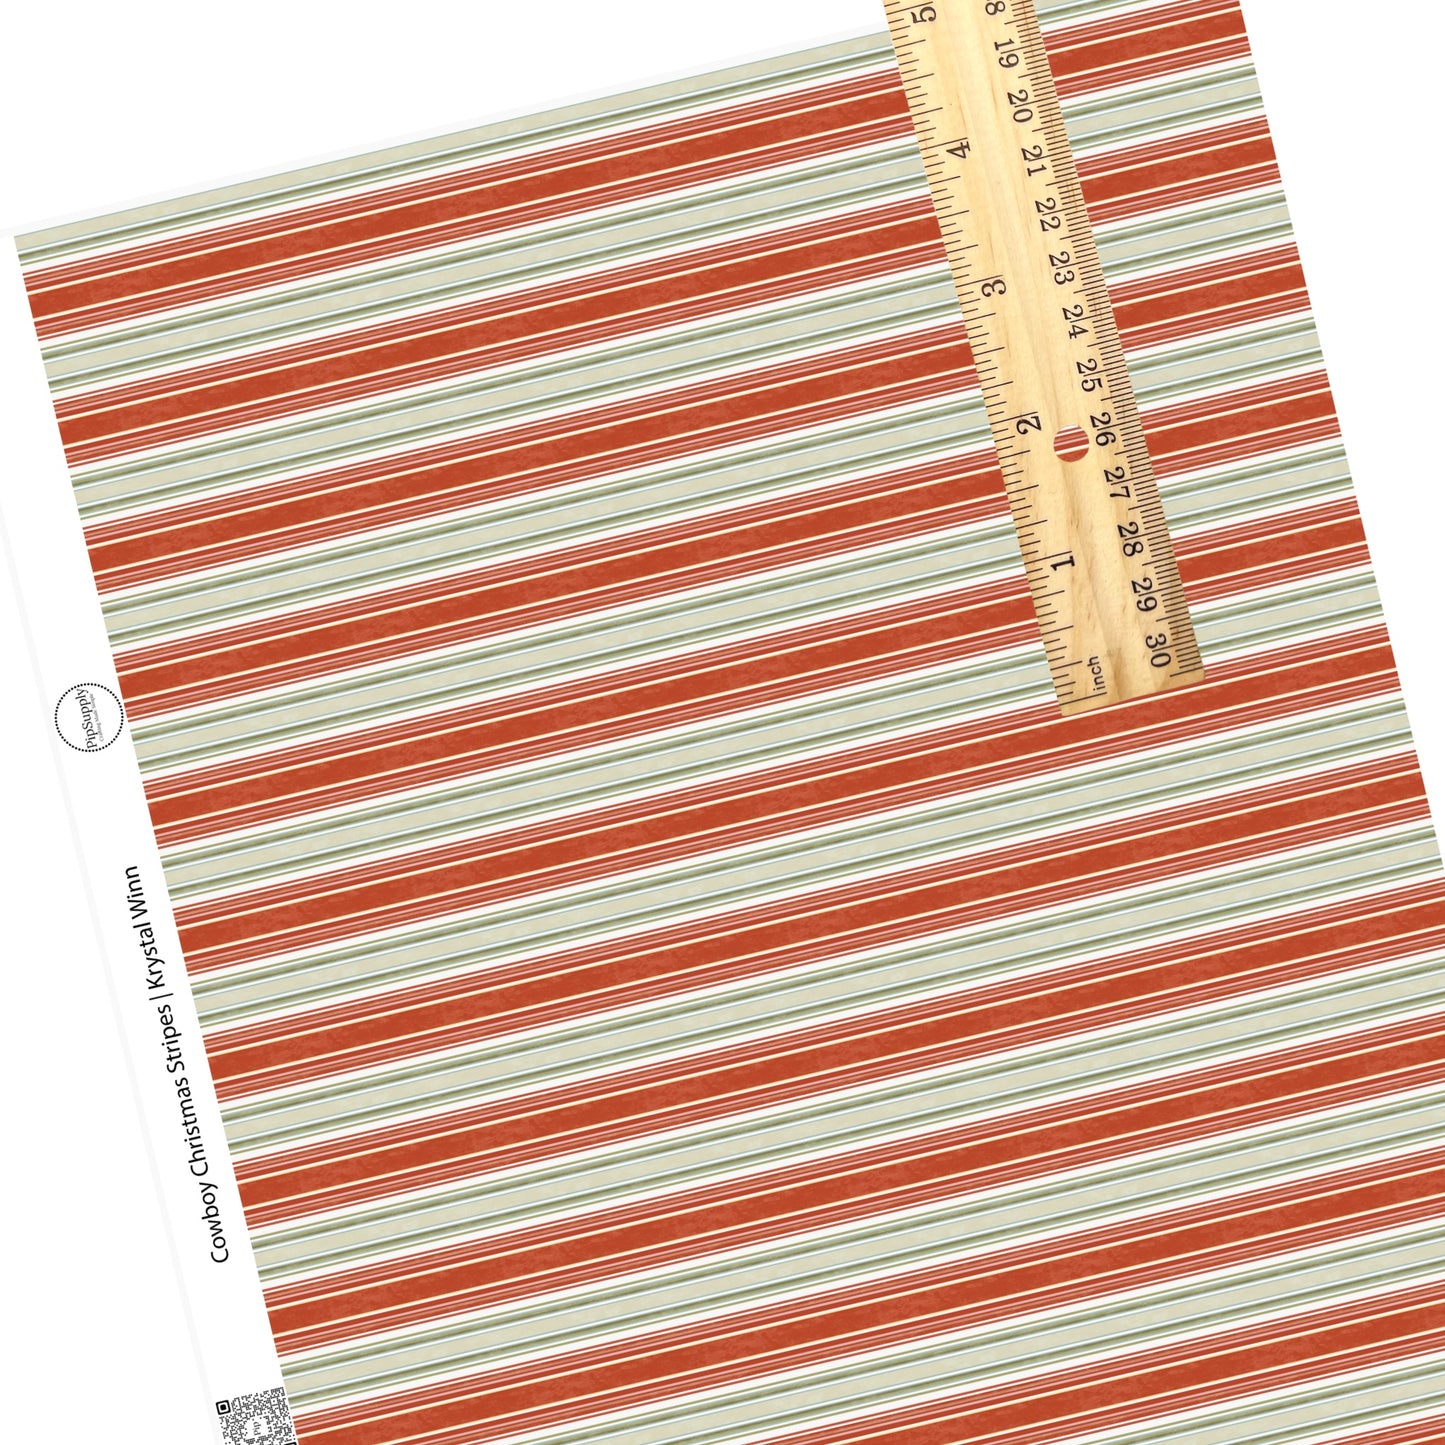 These holiday themed faux leather sheets contain the following design elements: light green white, and red stripes. Our CPSIA compliant faux leather sheets or rolls can be used for all types of crafting projects.